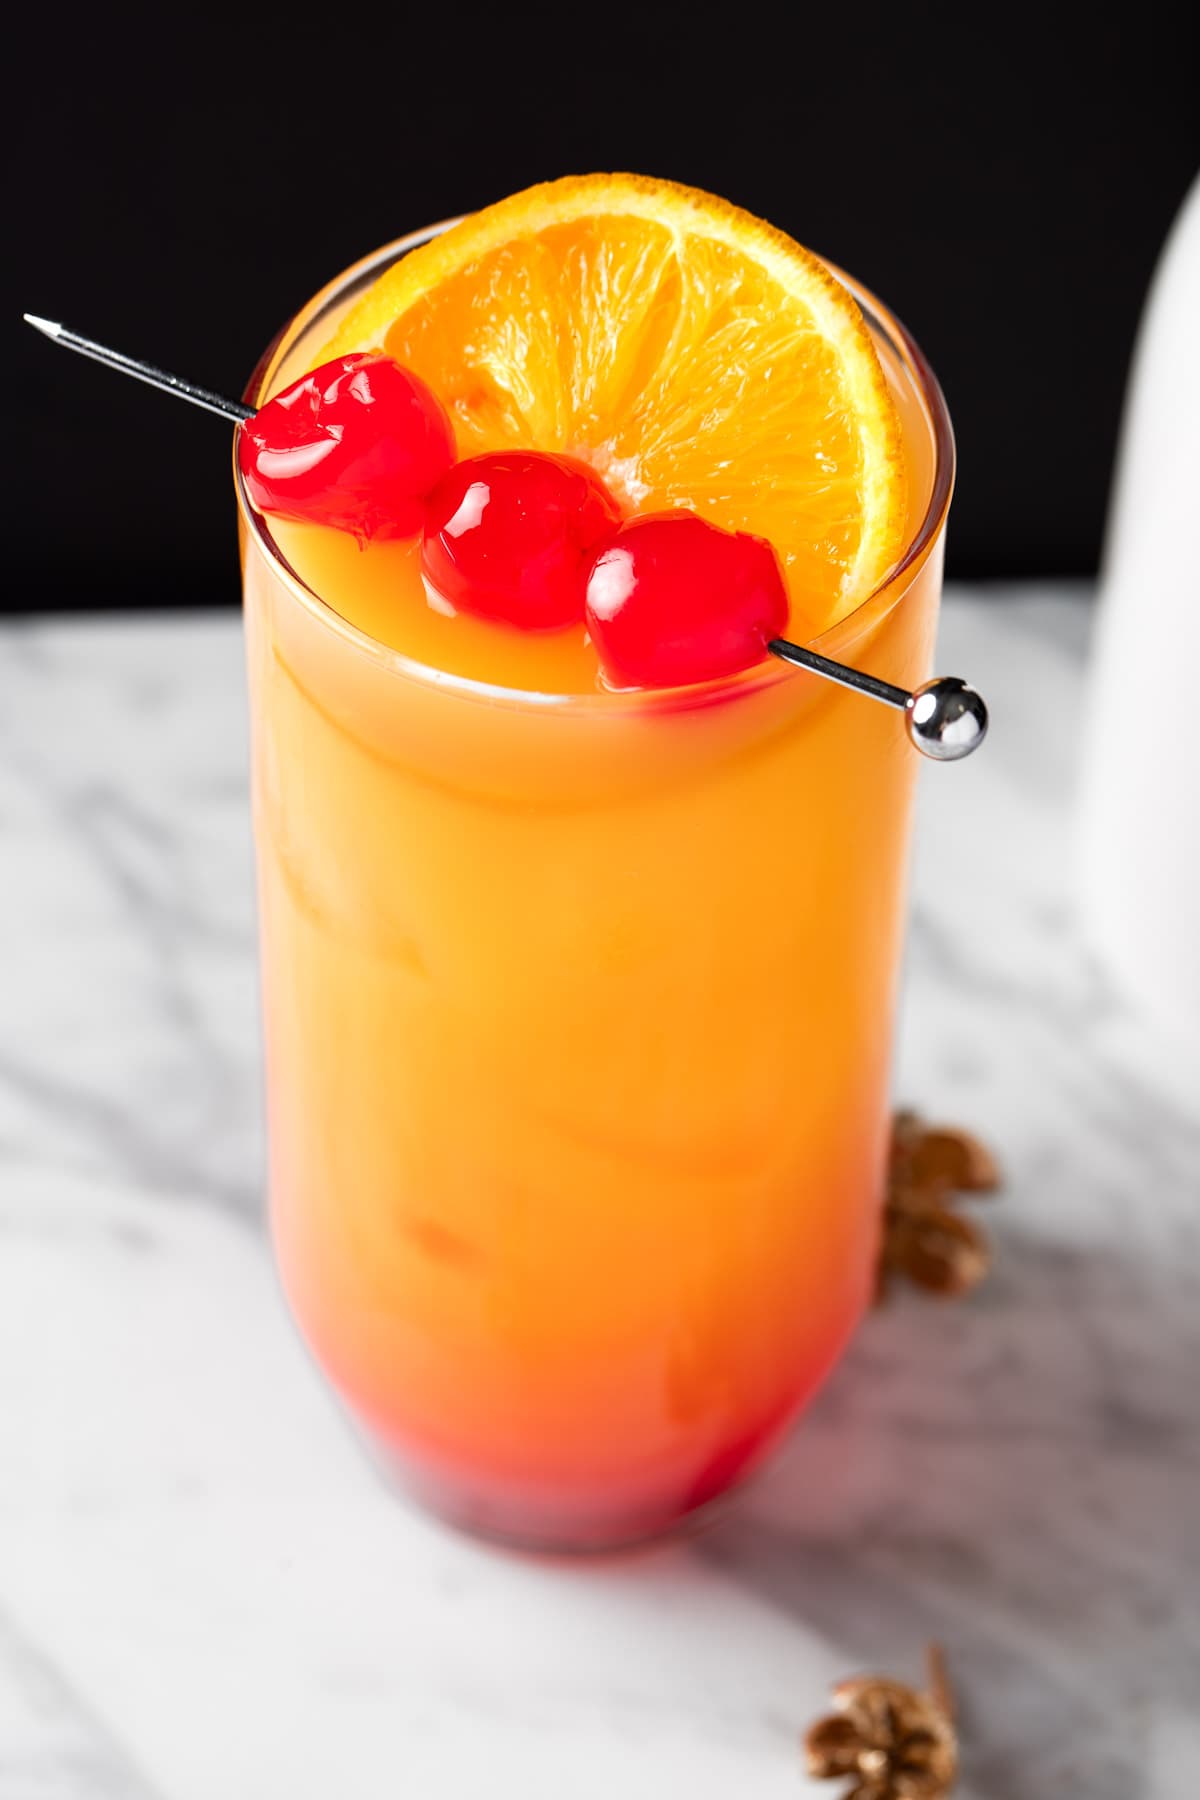 A Tequila Sunrise Without Grenadine Cocktail garnished with maraschino cherries.